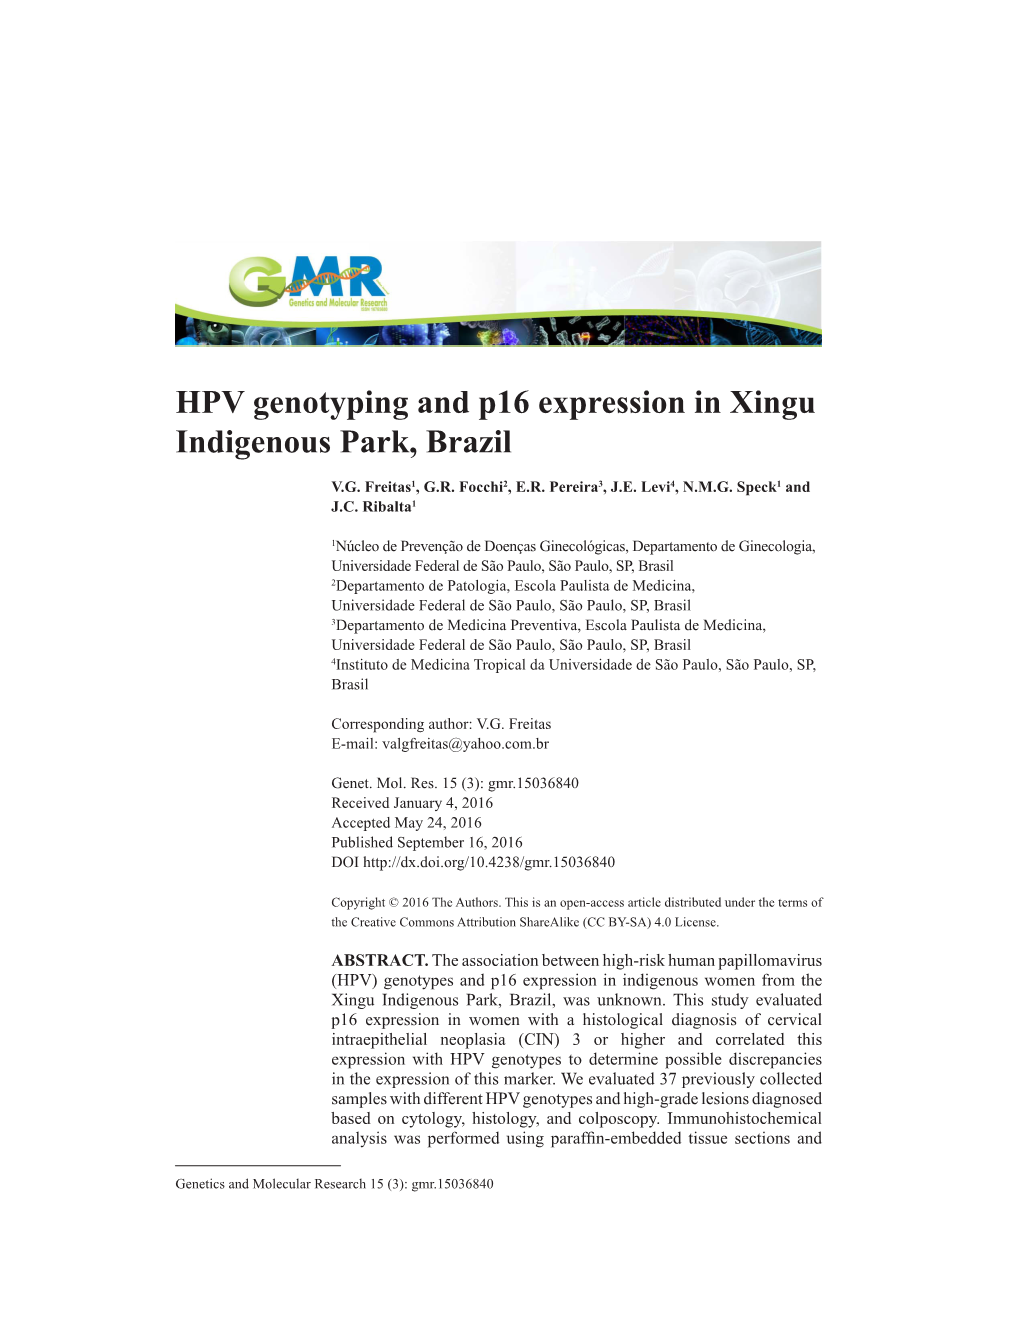 HPV Genotyping and P16 Expression in Xingu Indigenous Park, Brazil